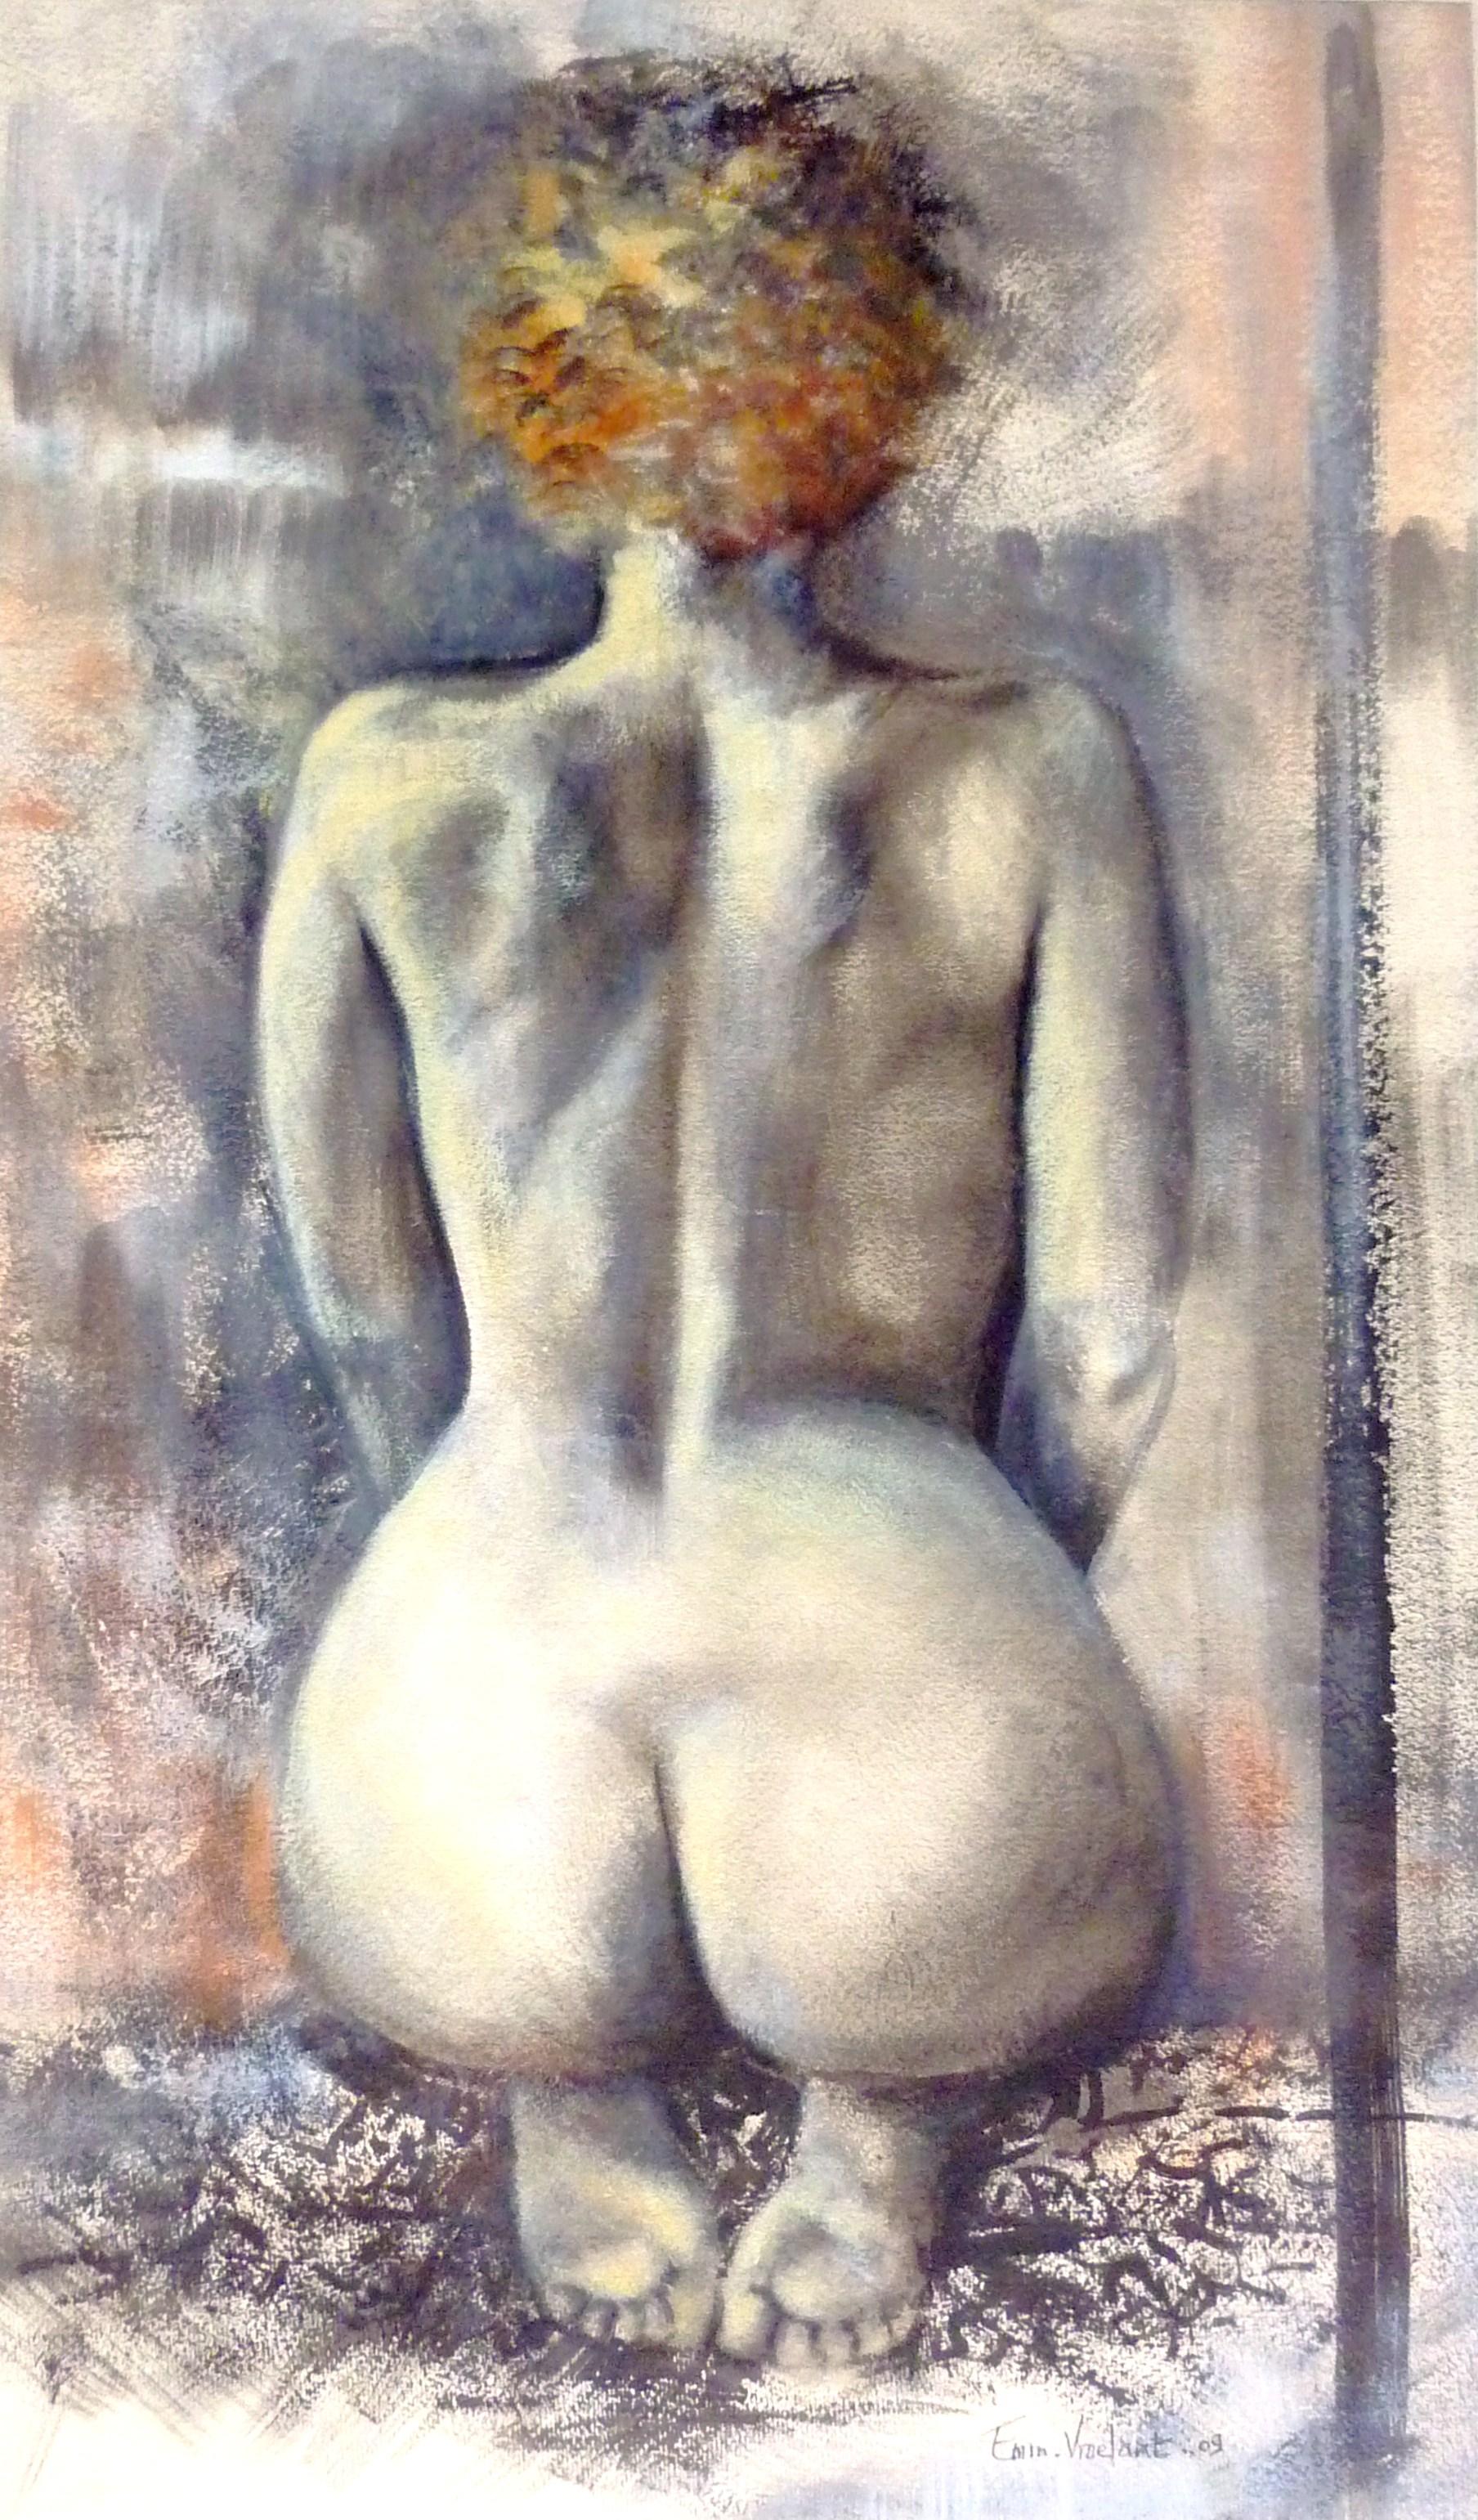 Emmanuelle Vroelant Nude Painting - "On house arrest" nude painting china ink  on canson paper framed 92x72cm 2009